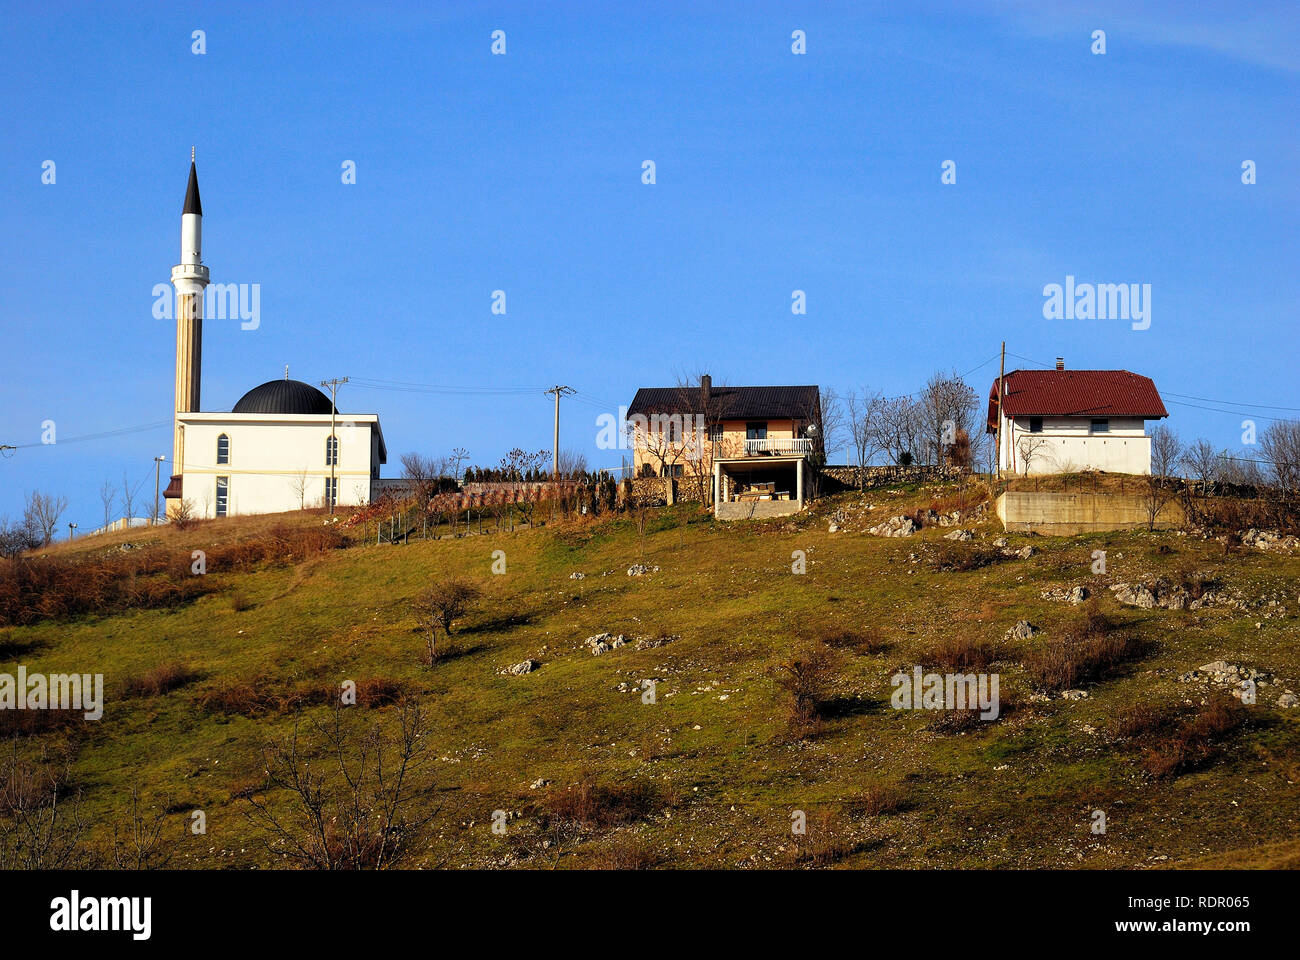 Bosnia and Herzegovina, outskirts of  Bihac. Two old country houses near a newly built mosque on a hill. Stock Photo